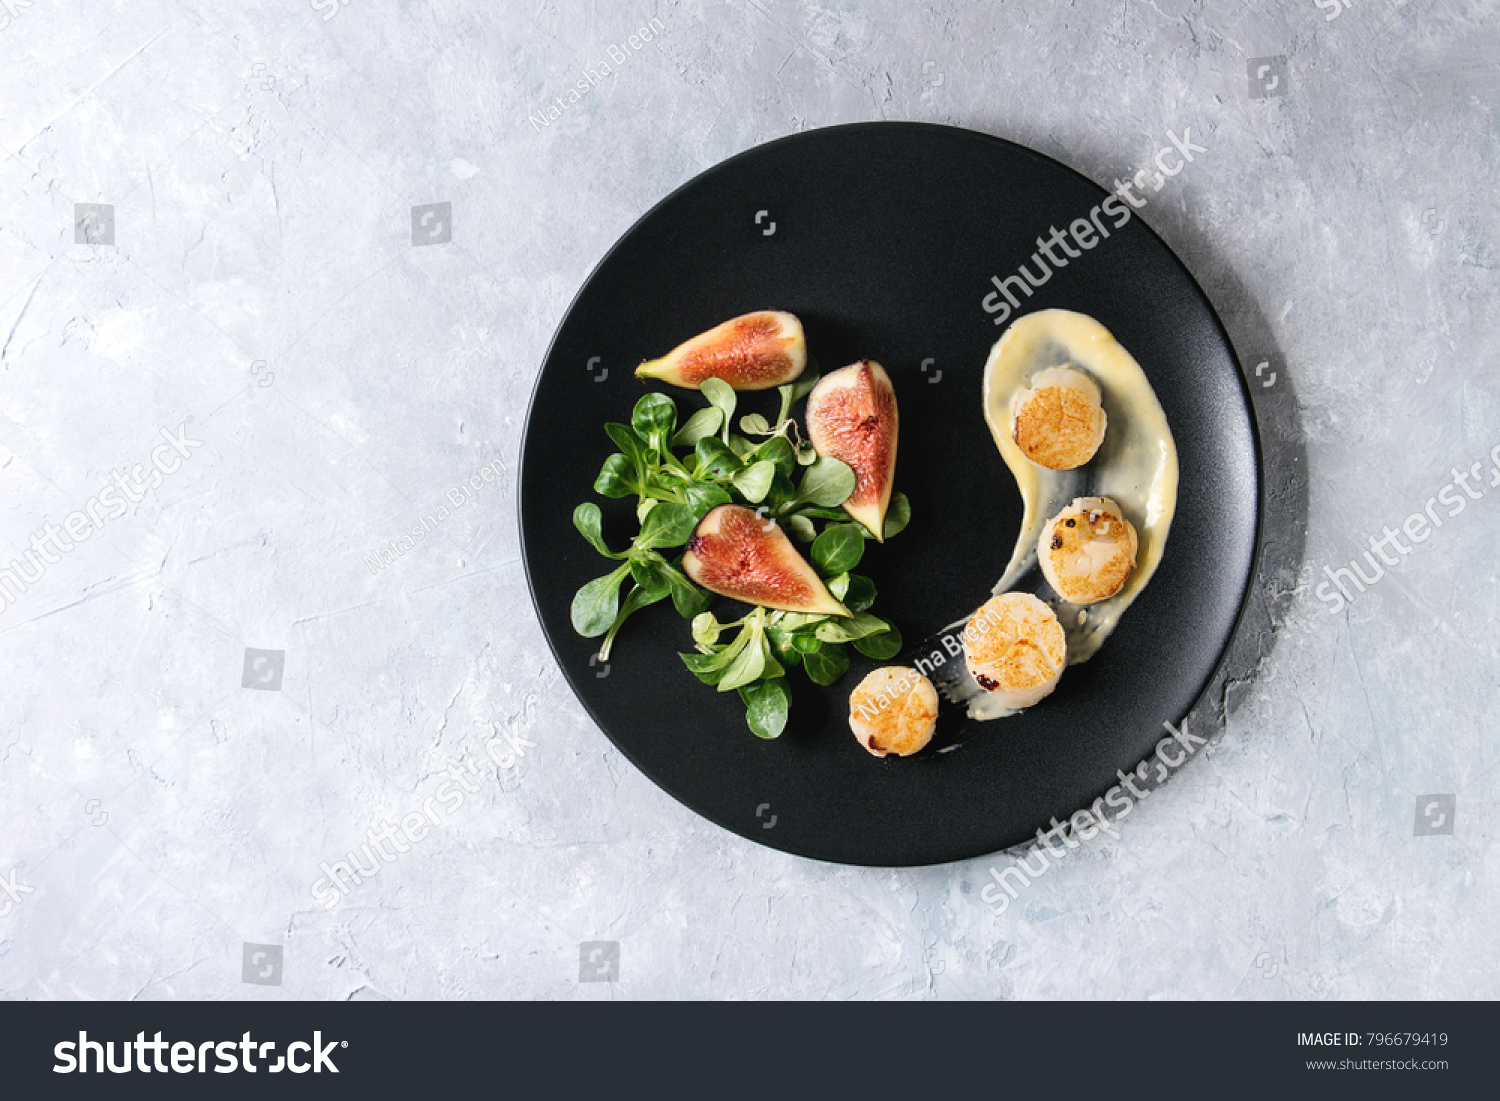 Fried scallops with lemon, figs, sauce and green salad served on black plate over gray texture background. Top view, copy space. Plating, fine dining #796679419